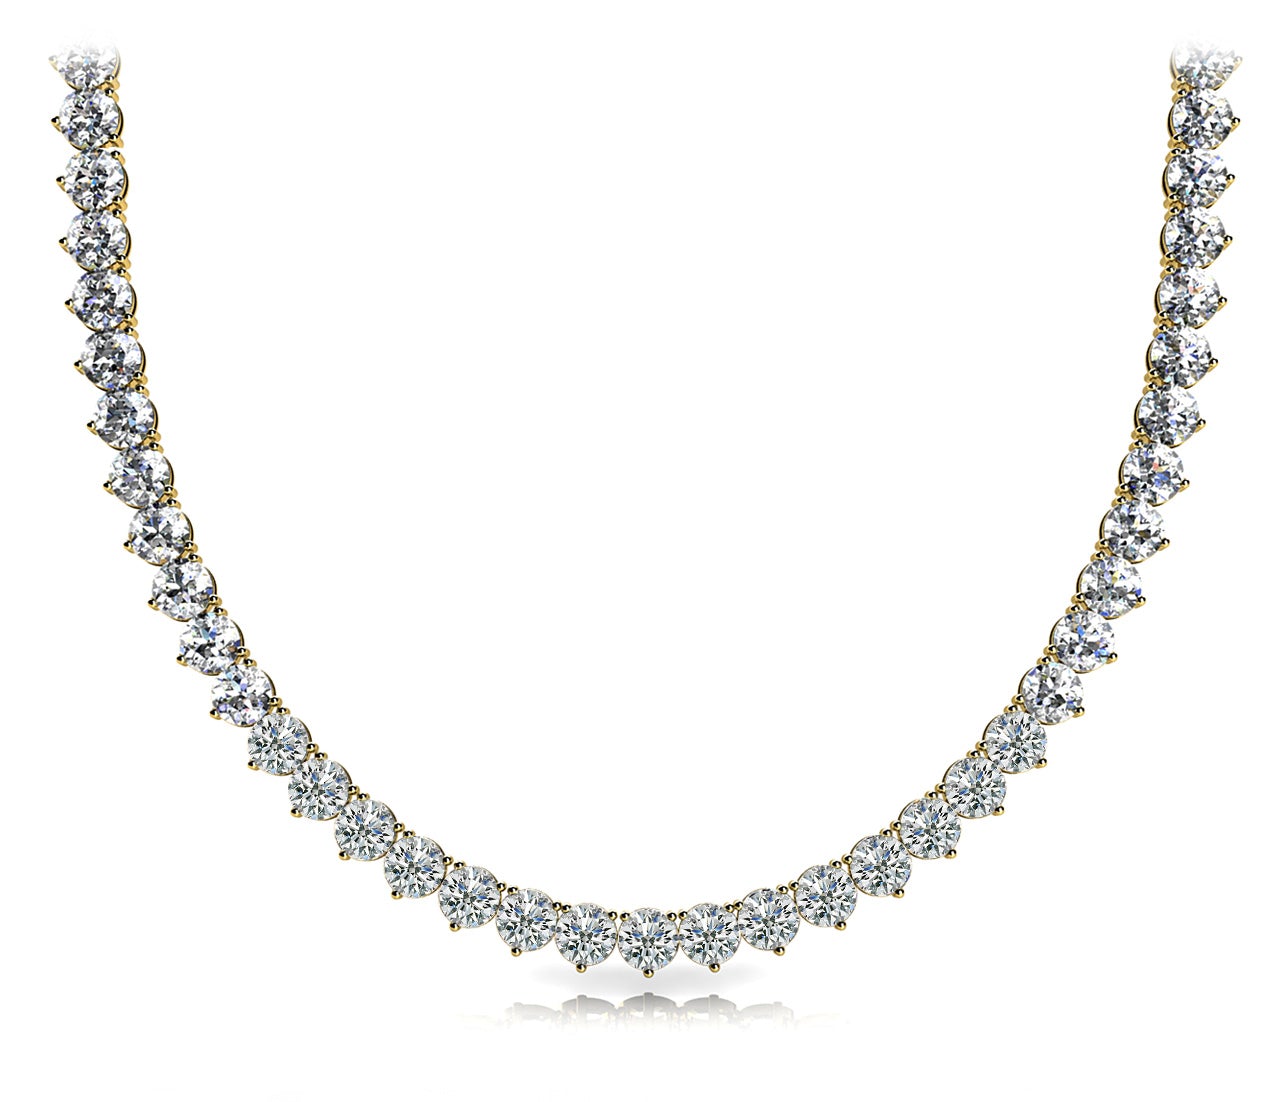 Diamond Rivera Necklace Round Shaped 19 Carat Necklace in 18K Yellow Gold Front View